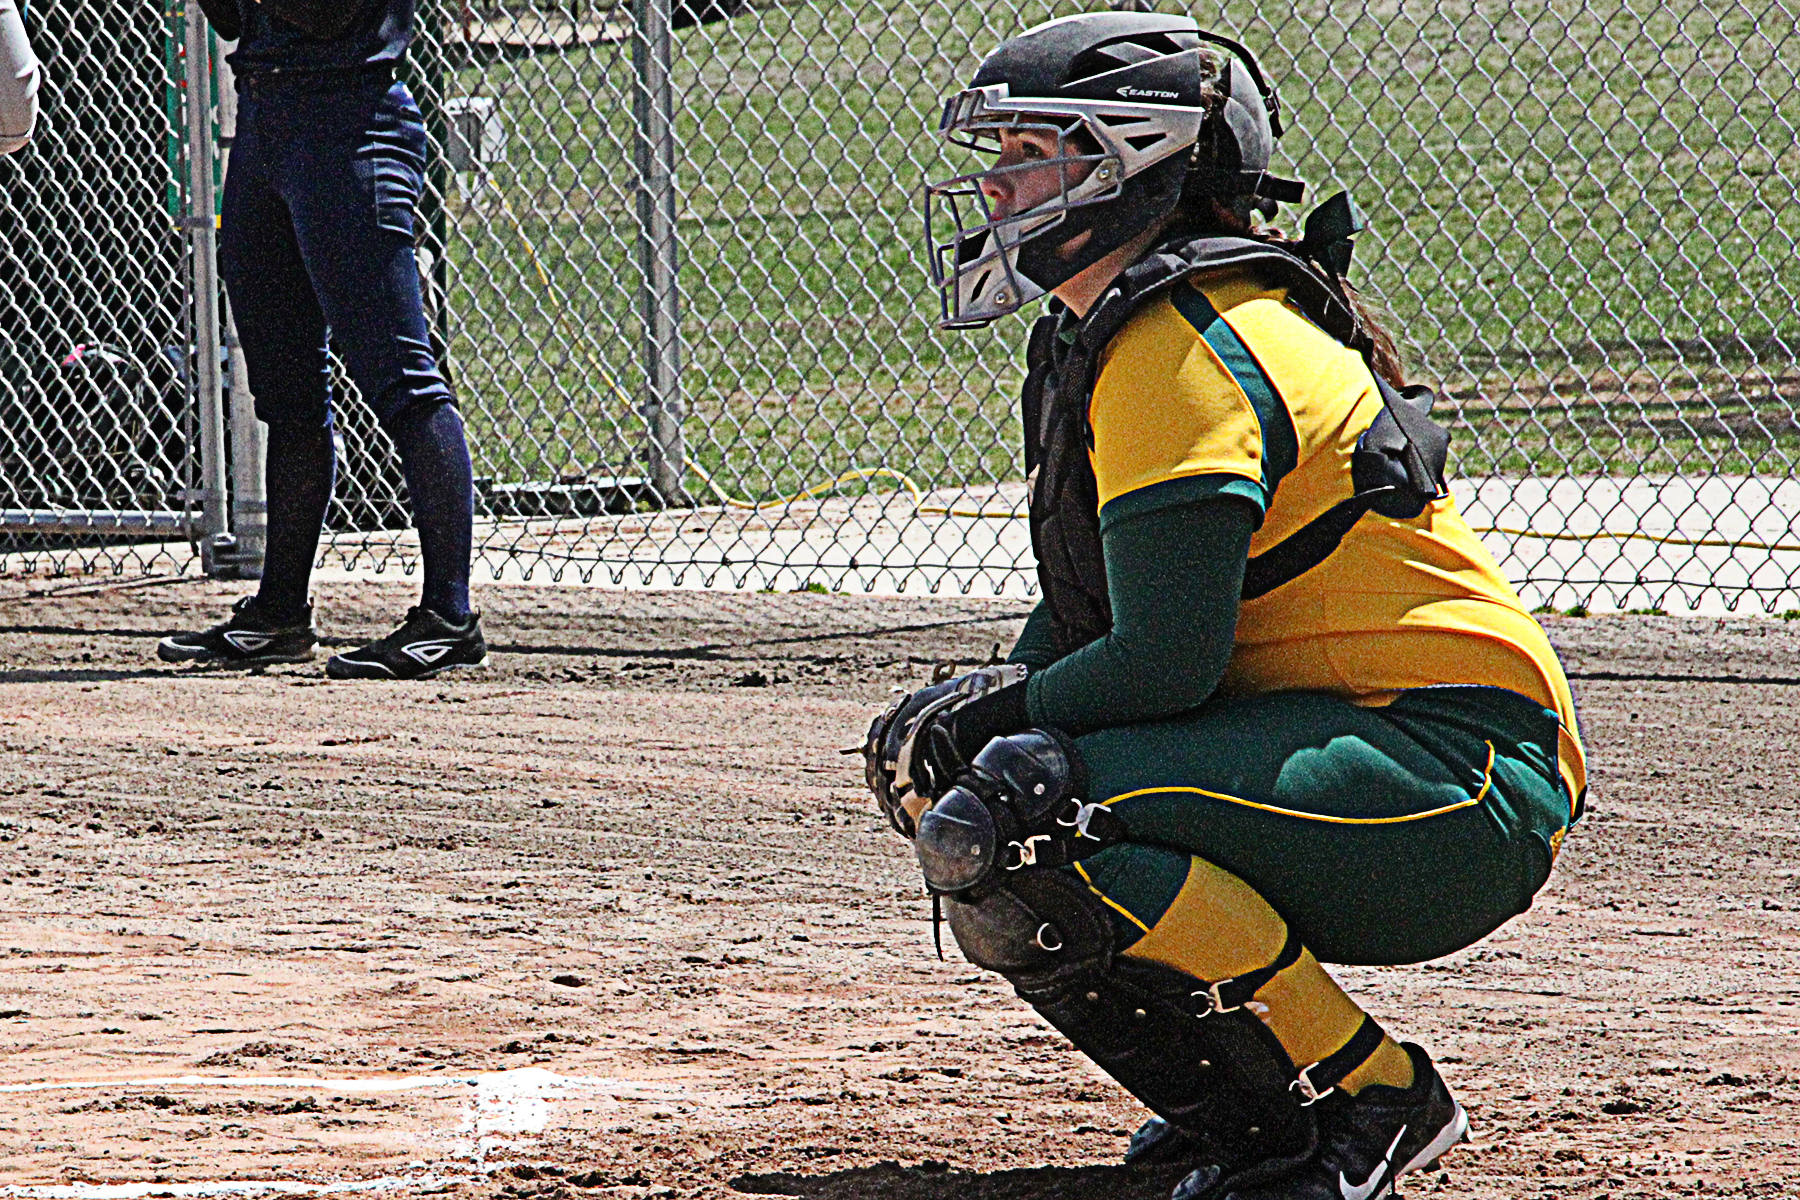 Fitchburg State Splits With Curry, 2-0/5-4